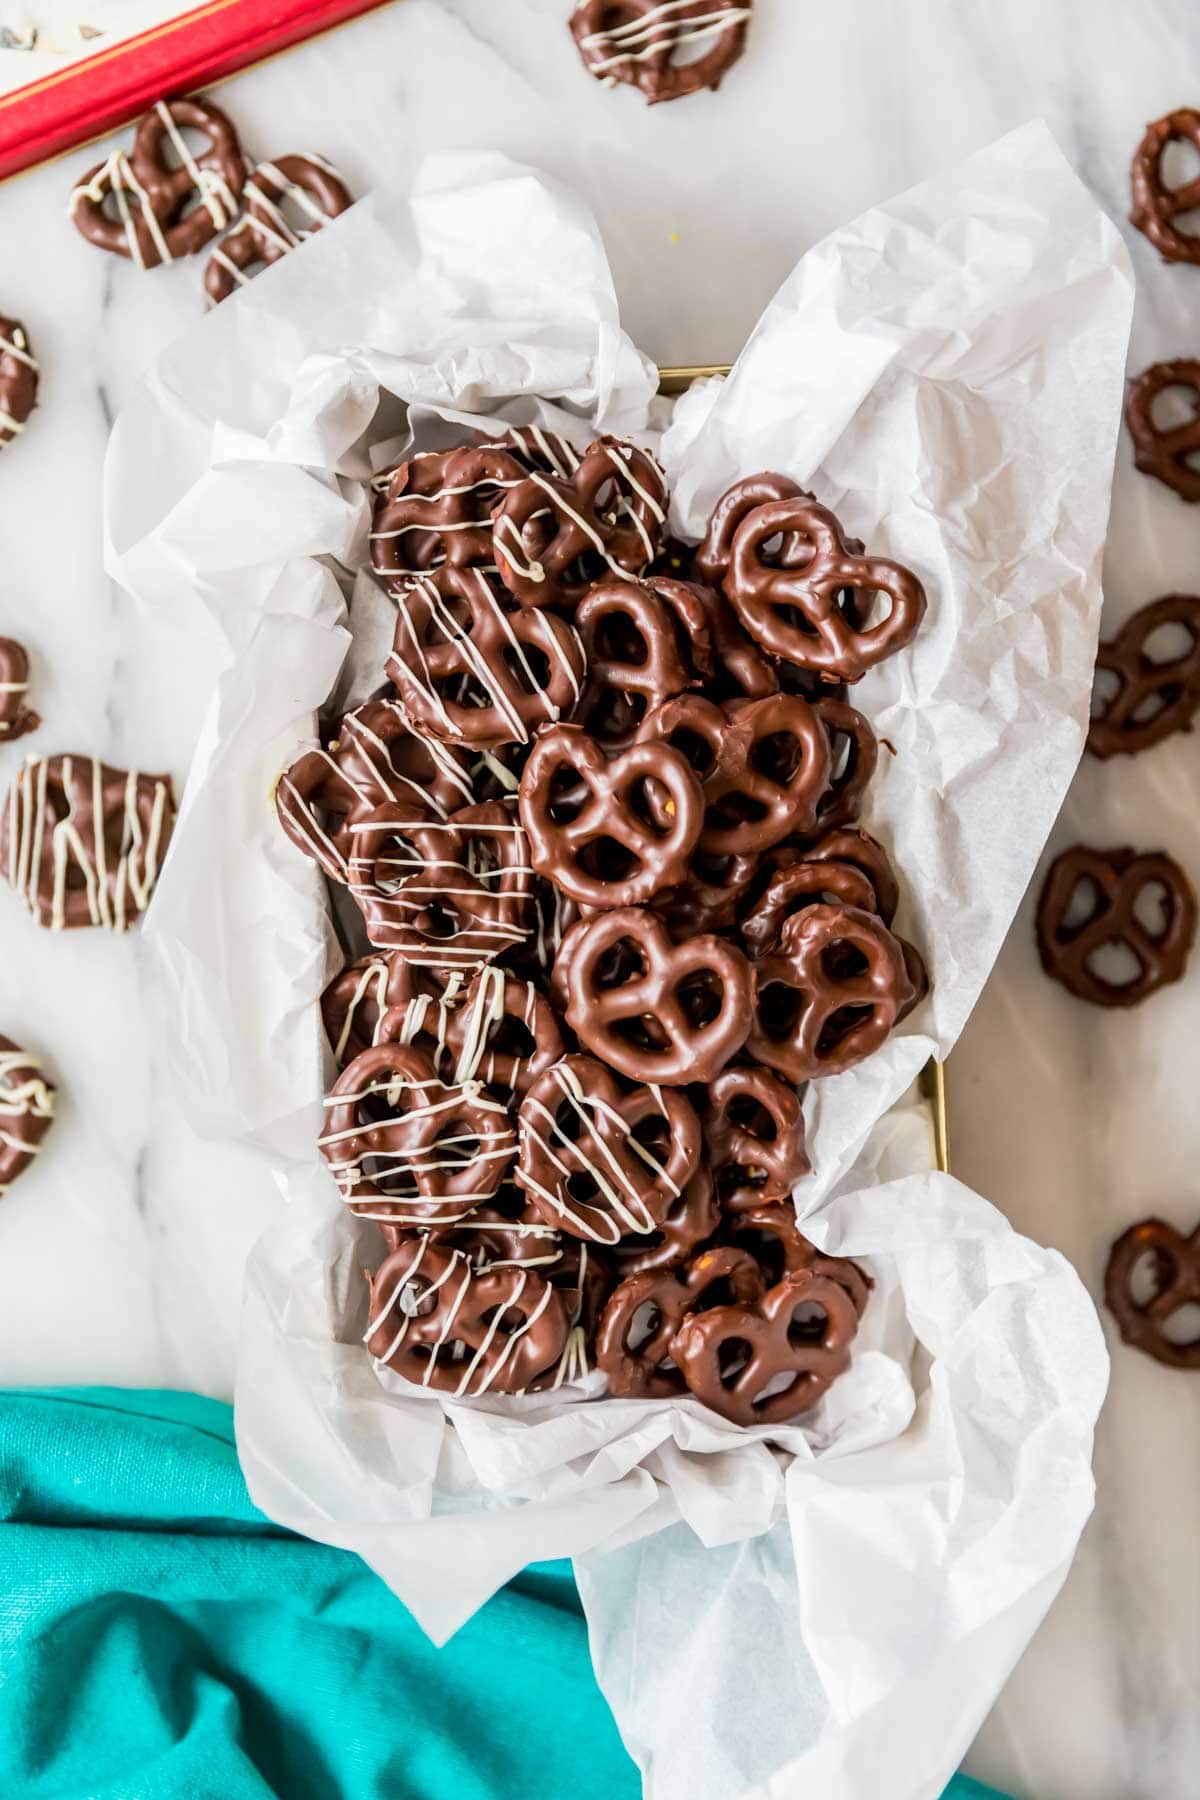 Overhead view of chocolate dipped pretzels in a parchment lined bread pan.